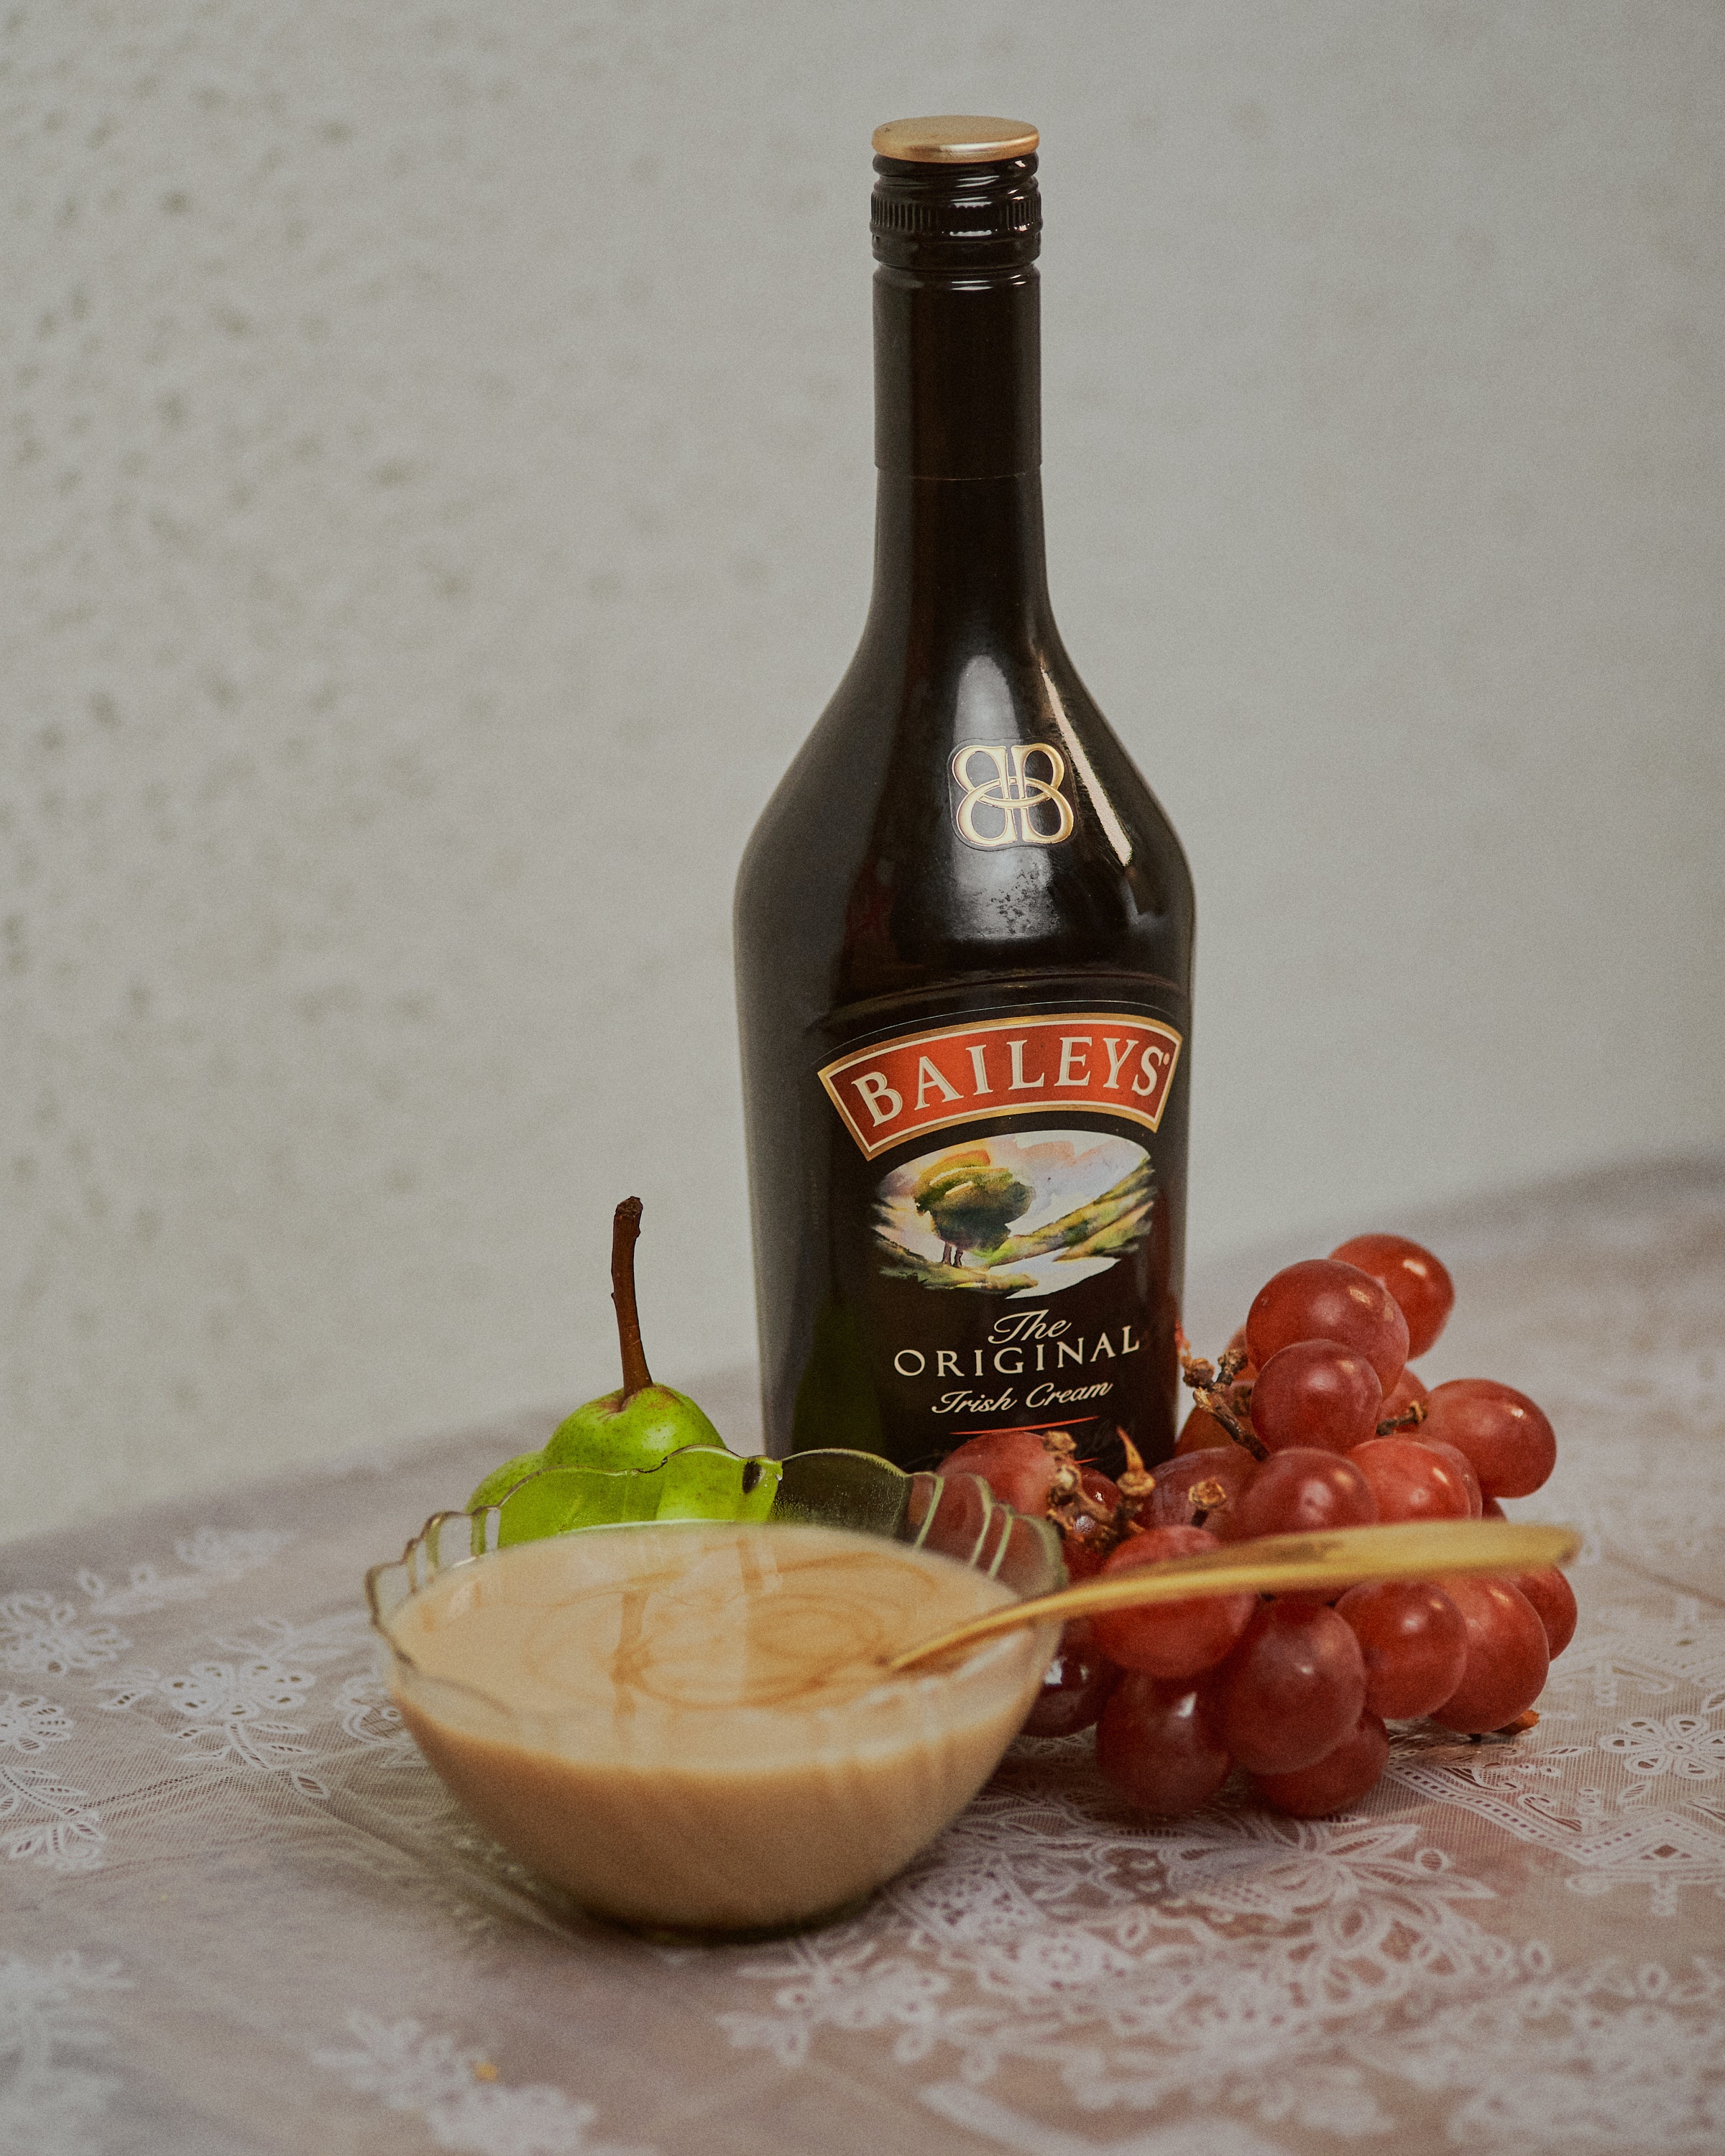 Baileys how to drink